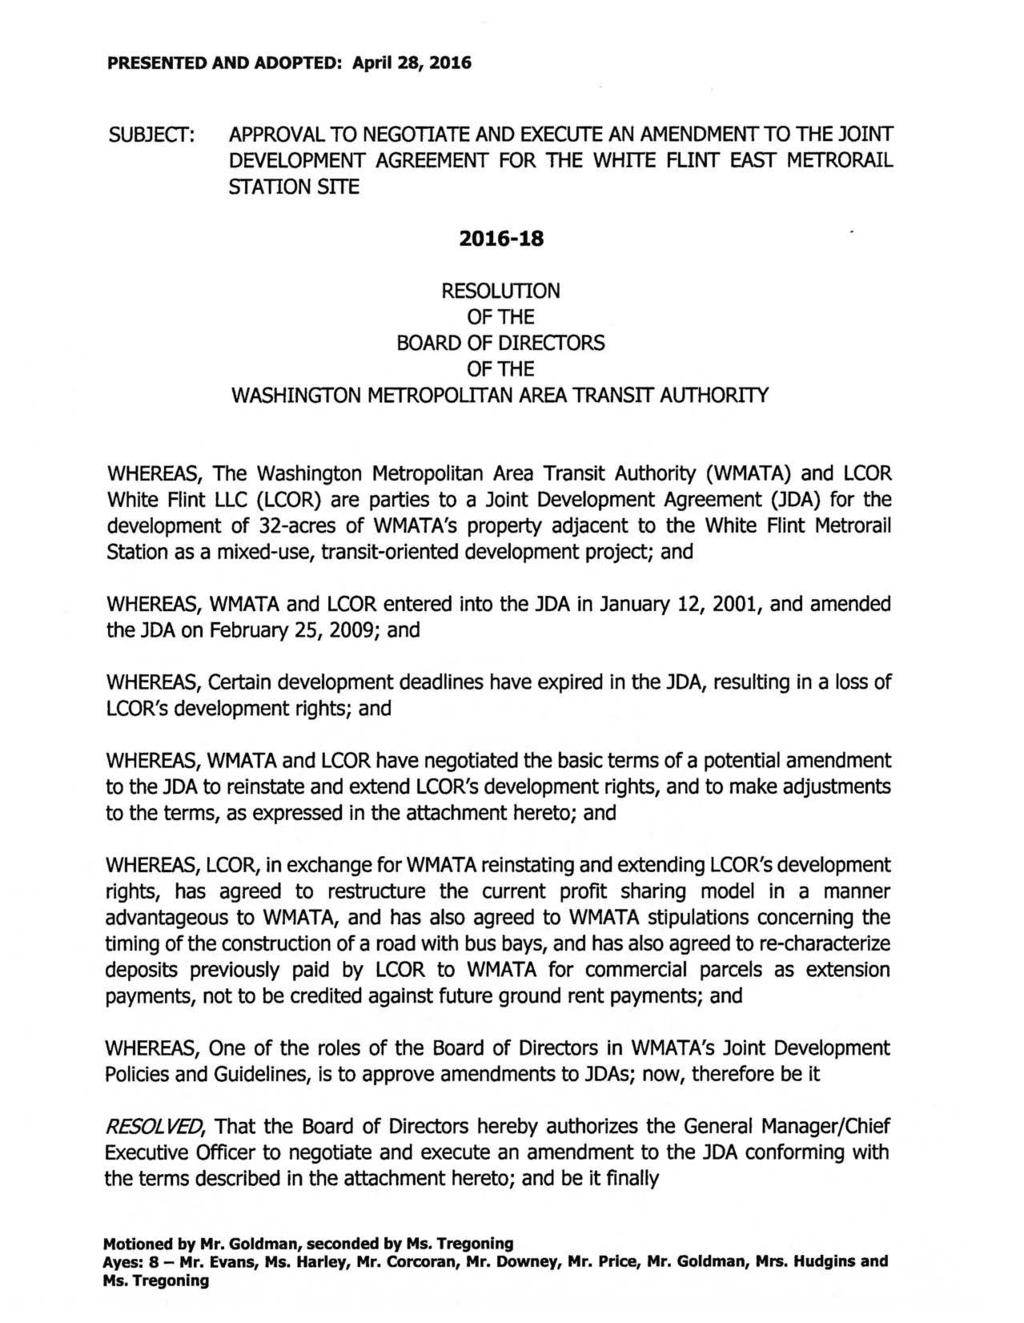 PRESENTED AND ADOPTED: April 28, 2016 SUBJECT: APPROVAL TO NEGOTIATE AND EXECUTE AN AMENDMENT TO THE JOINT DEVELOPMENT AGREEMENT FOR THE WHITE FLINT EAST METRORAIL STATION SITE 2016-18 RESOLUTION OF